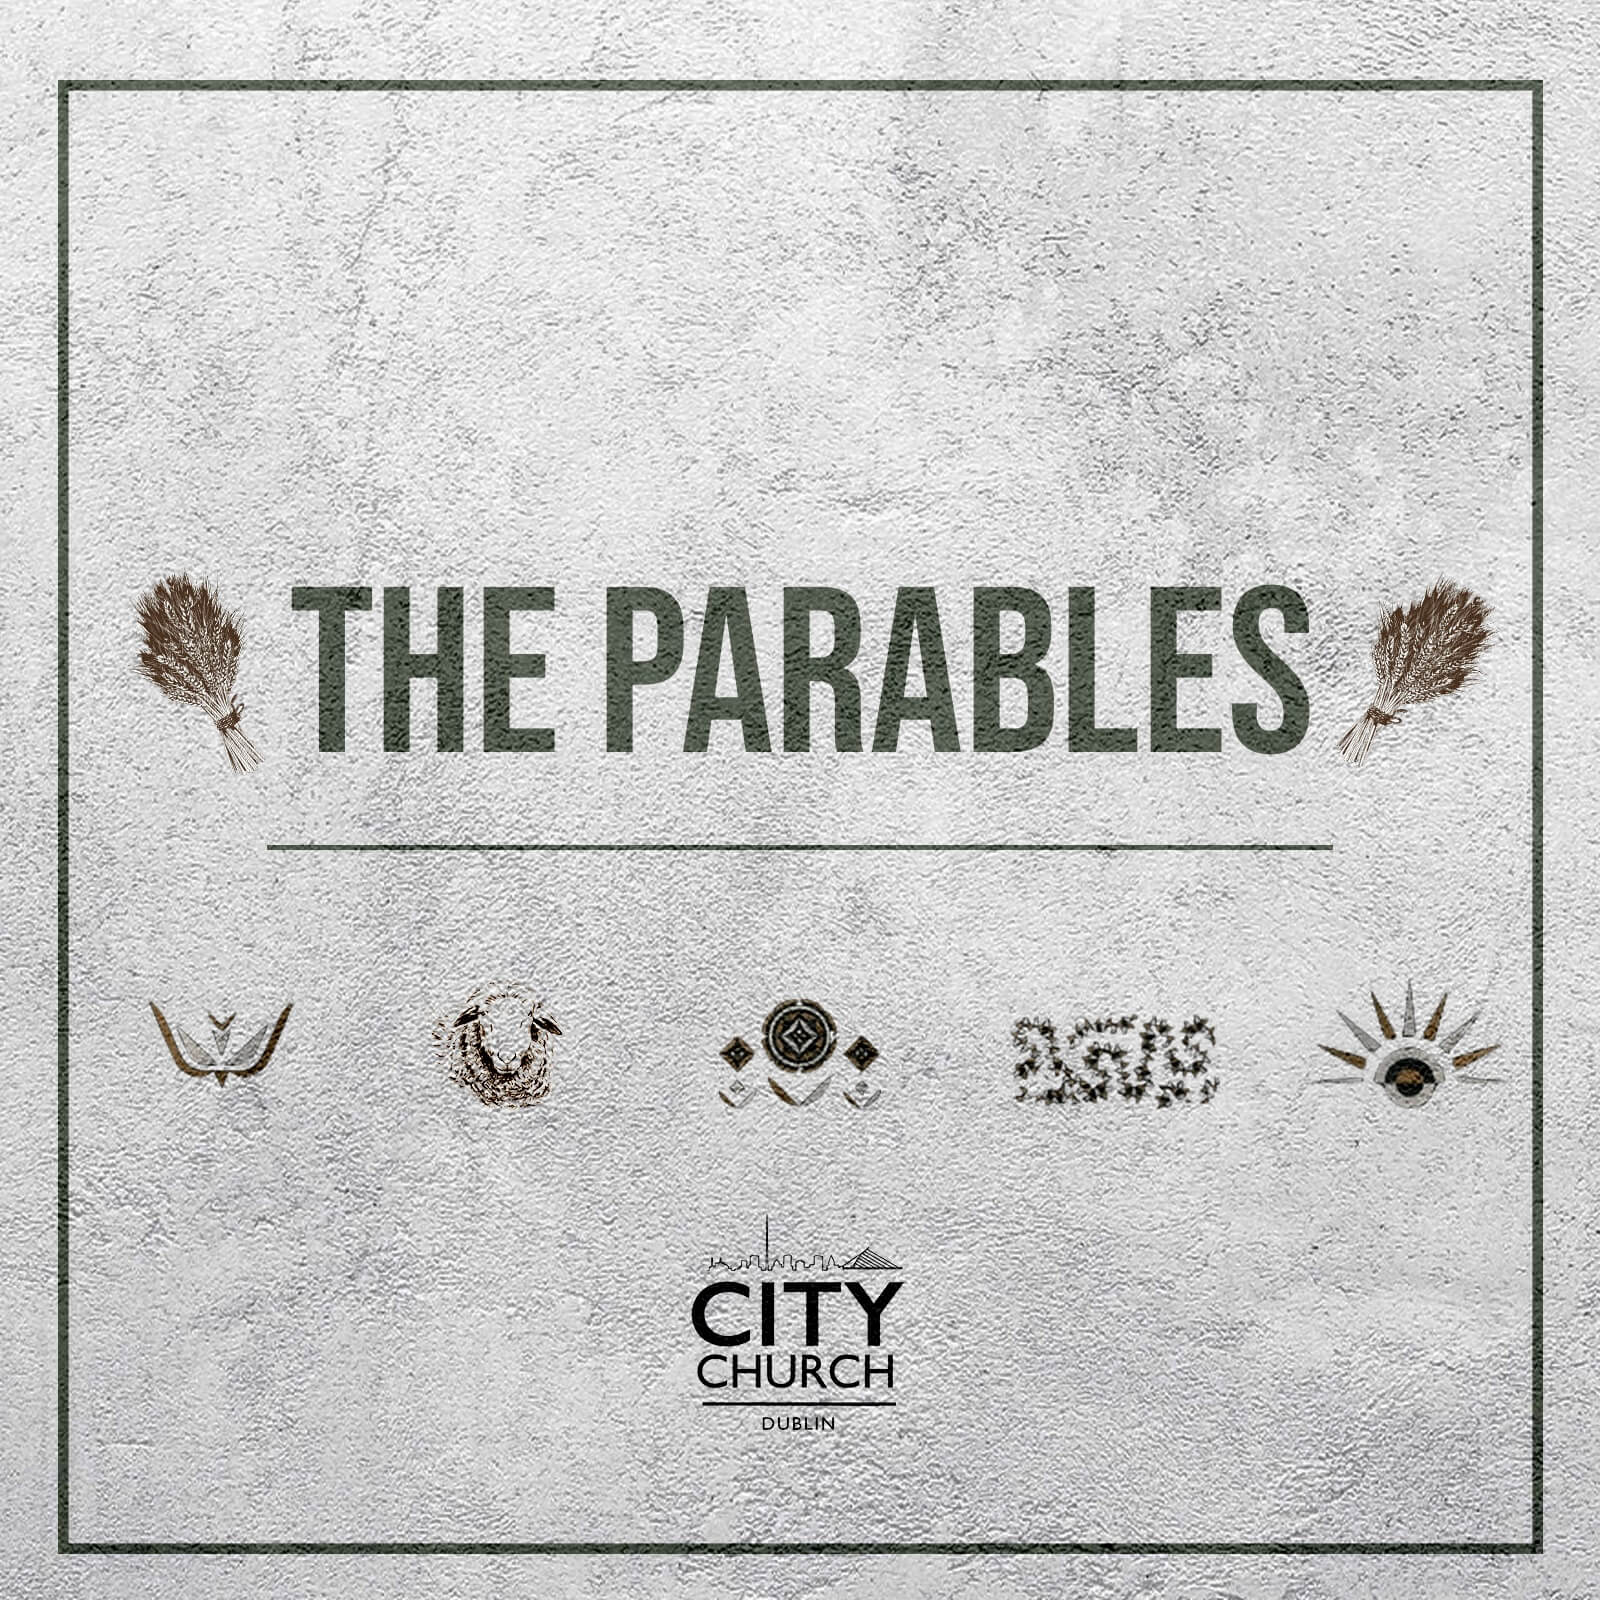 Matthew 13:1-23 - The Parables